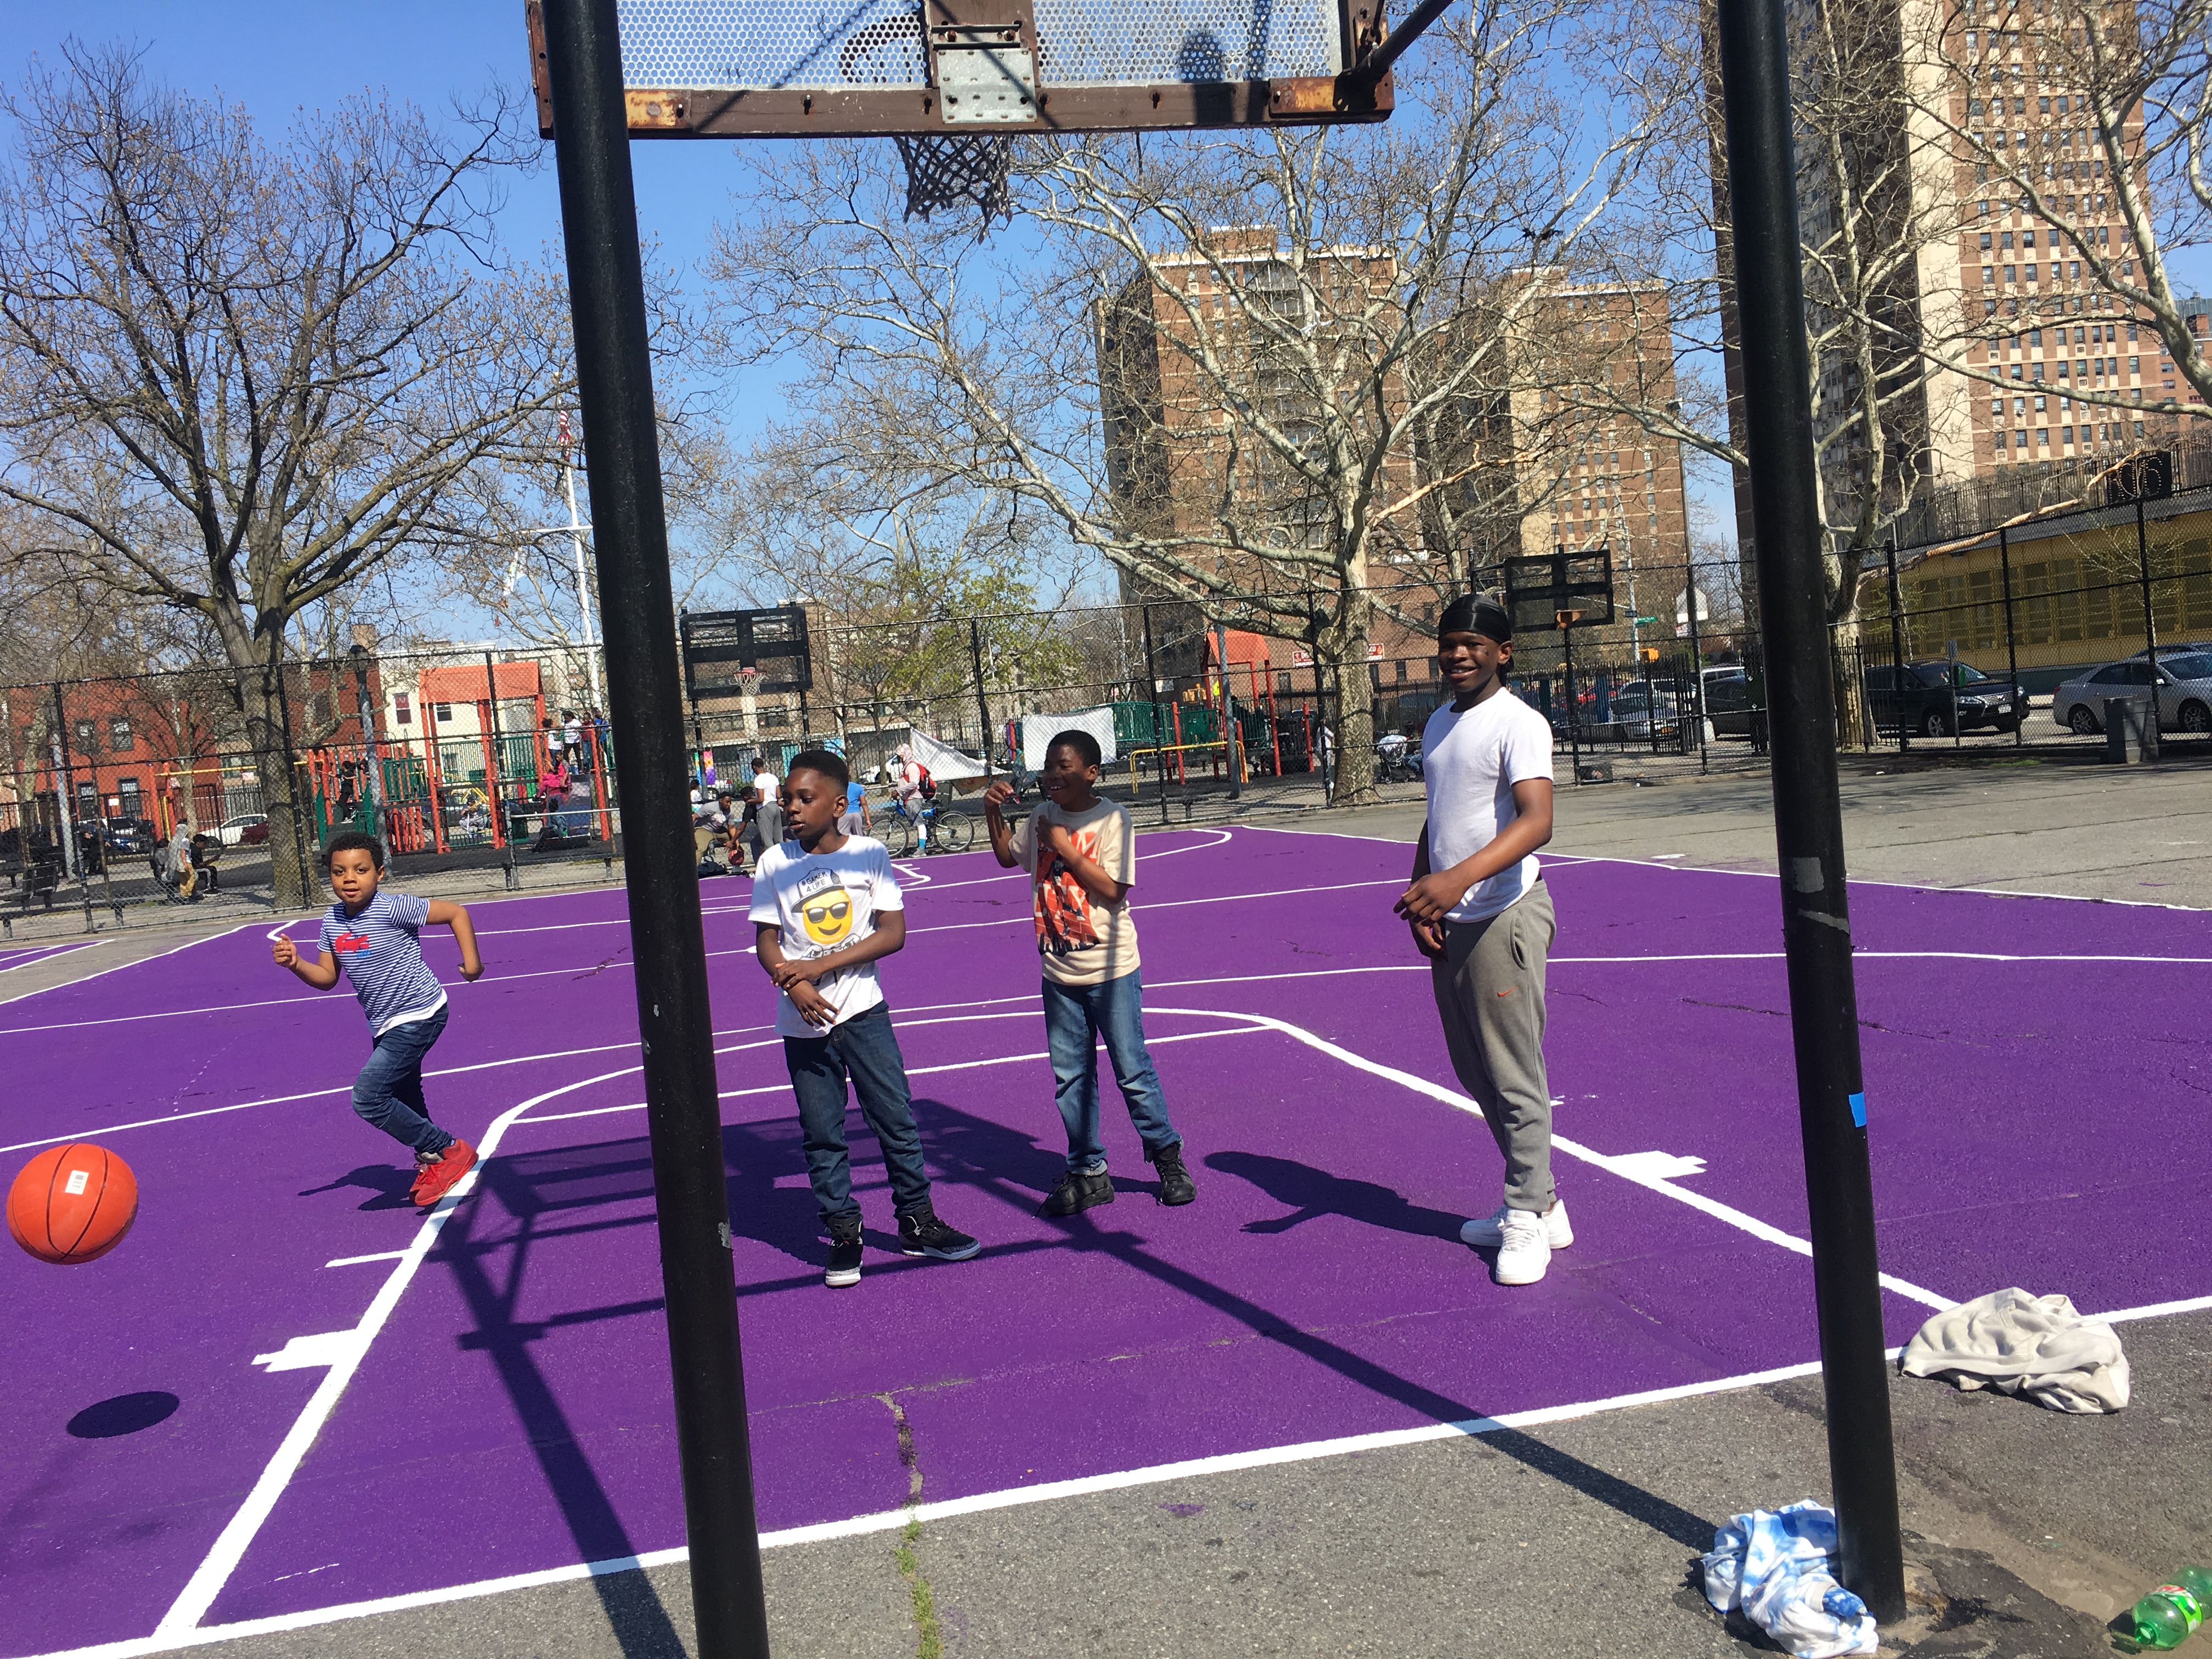 Four young boys with dark skin tone play basketball on a brightly-painted basketball court in New York City.